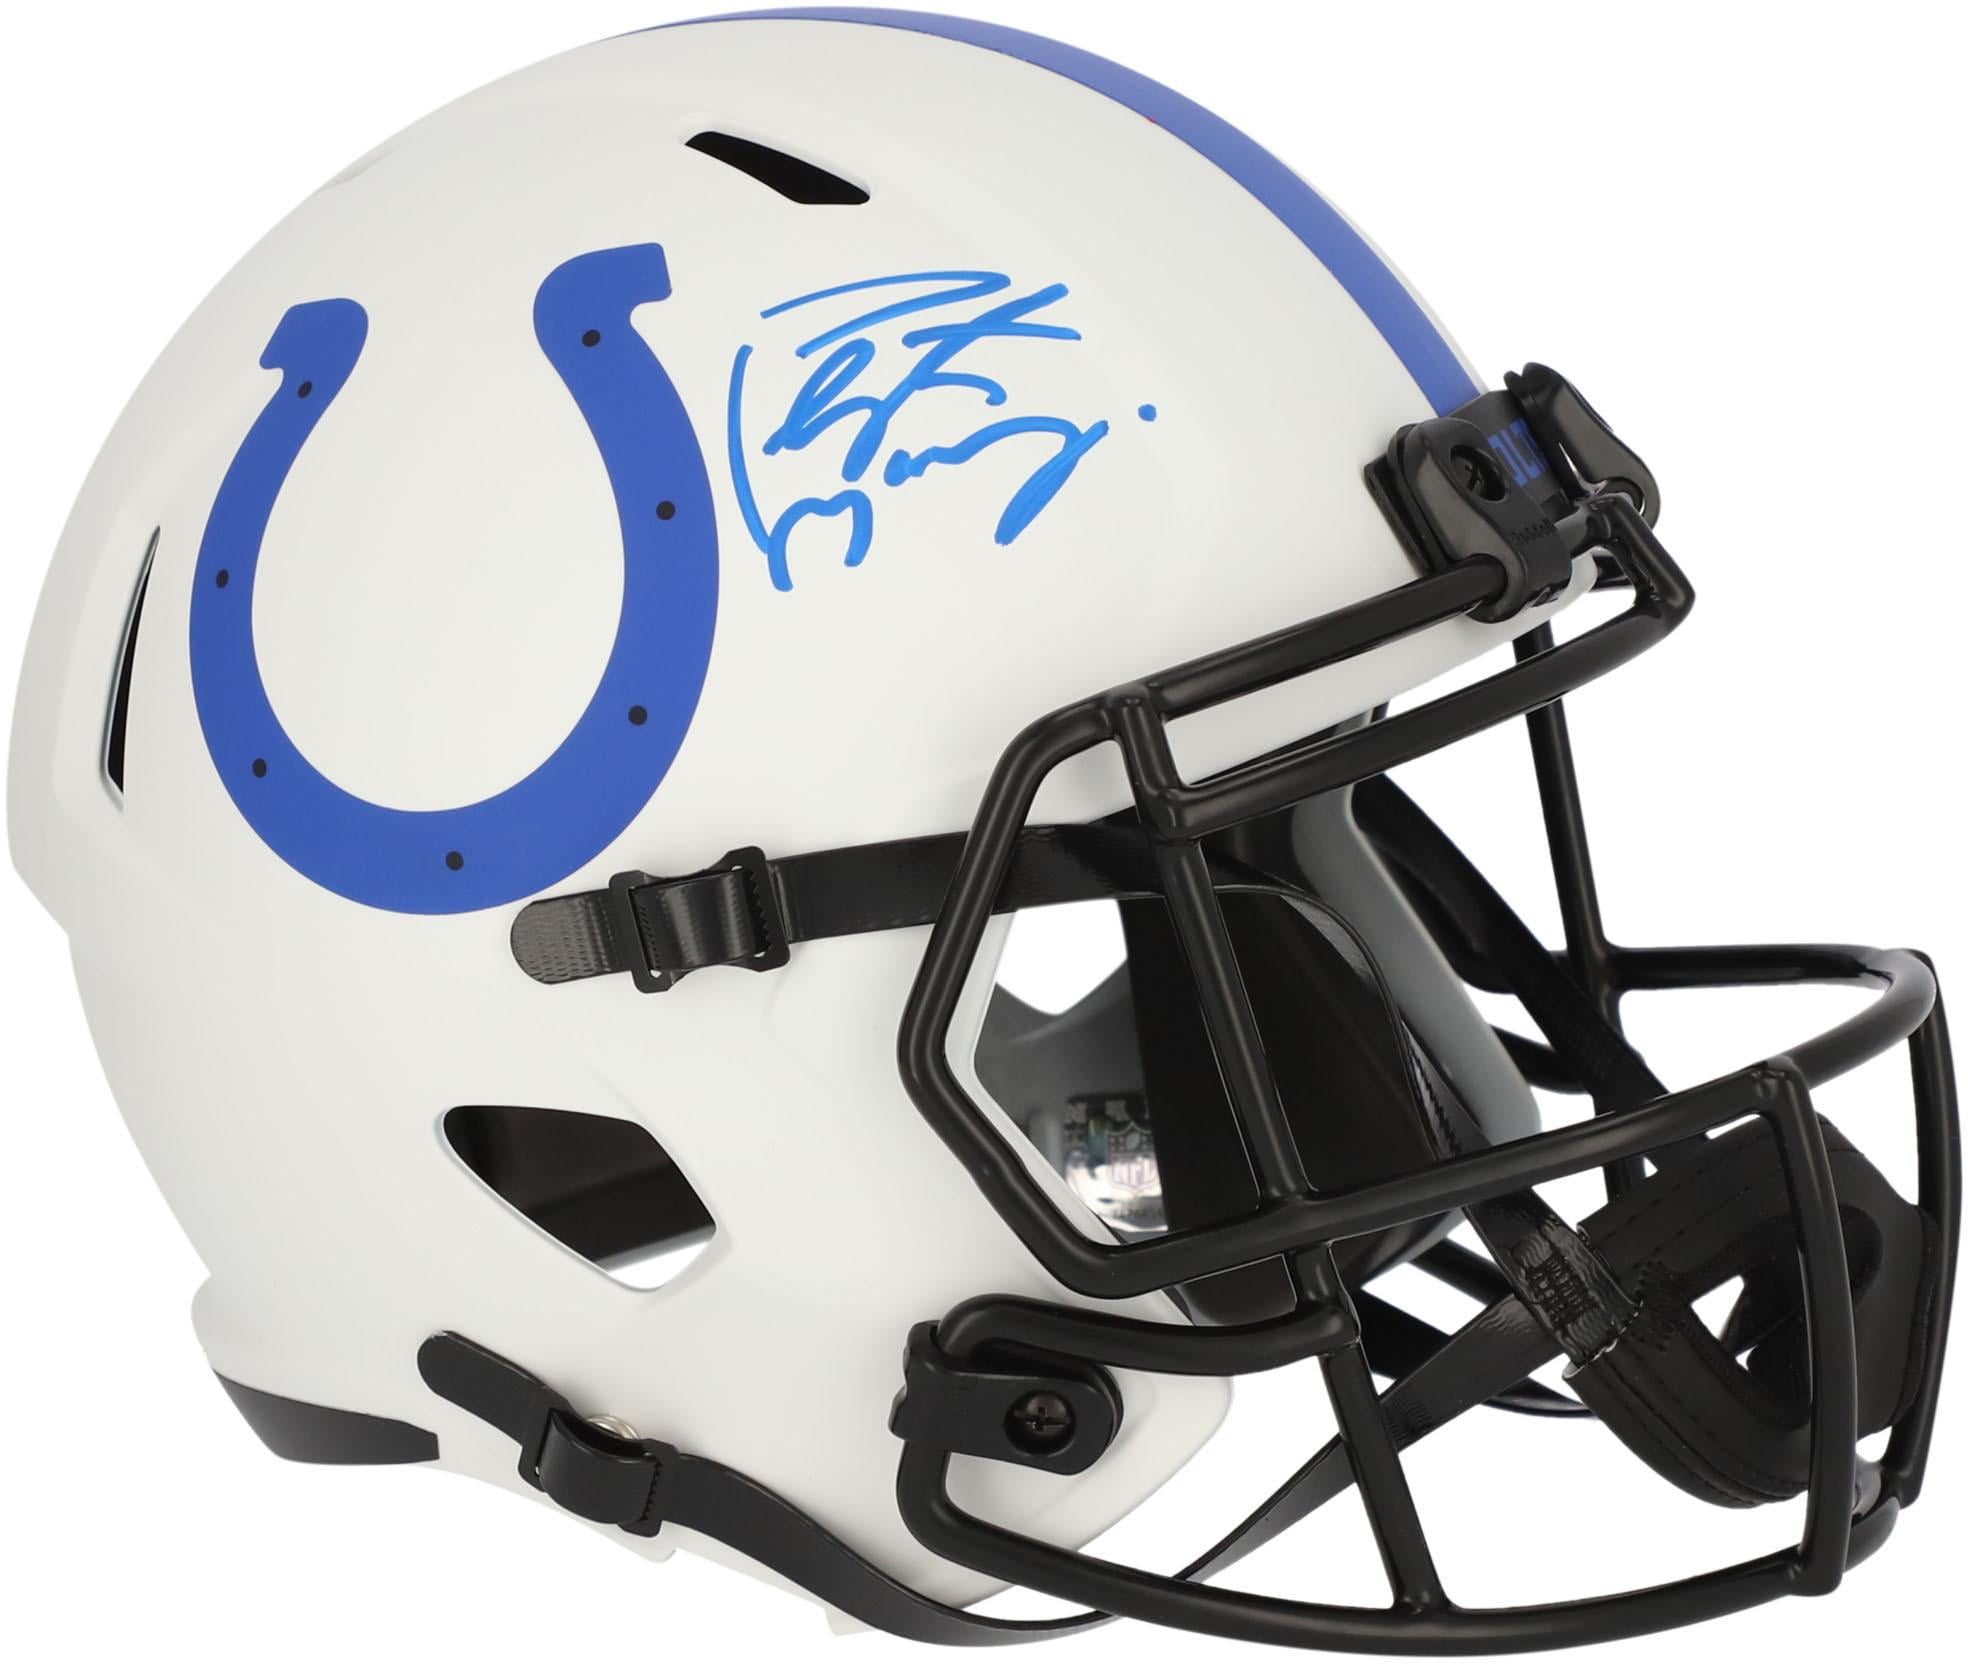 Peyton Manning Indianapolis Colts Autographed Riddell Lunar Eclipse  Alternate Speed Replica Helmet - Fanatics Authentic Certified 